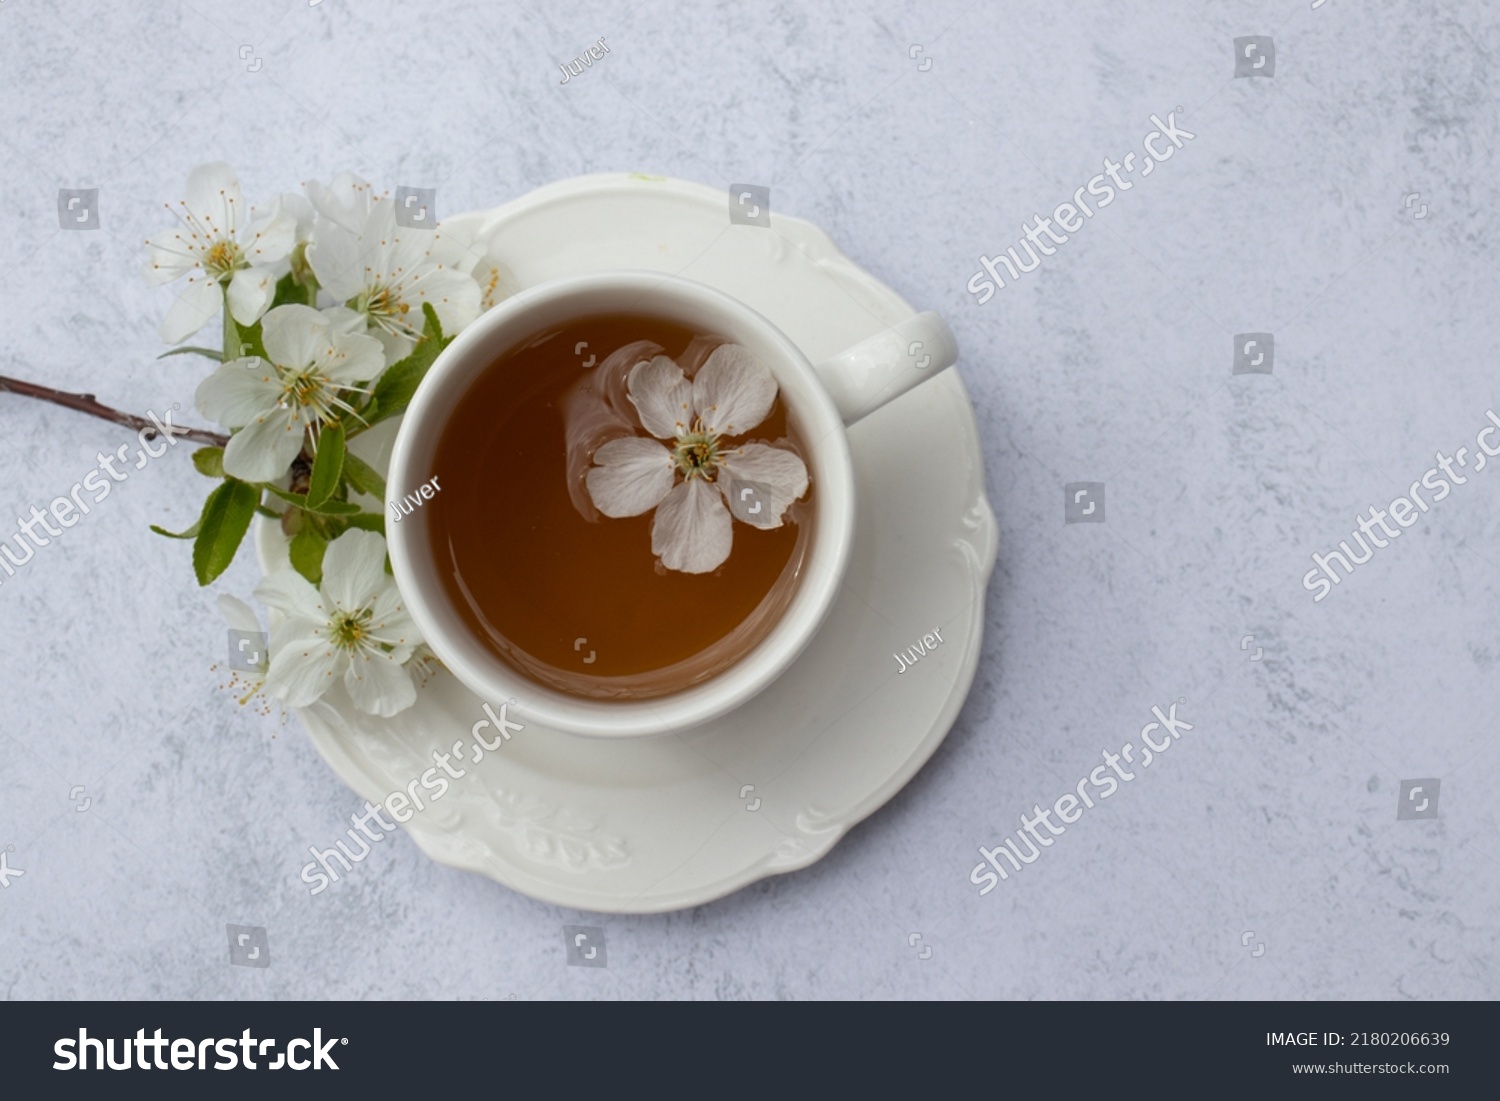 Cup of tea with white flowers on marble table. Minimalist still life in white color. Relaxation, healthy lifestyle, self care concept. Flat lay, top view #2180206639